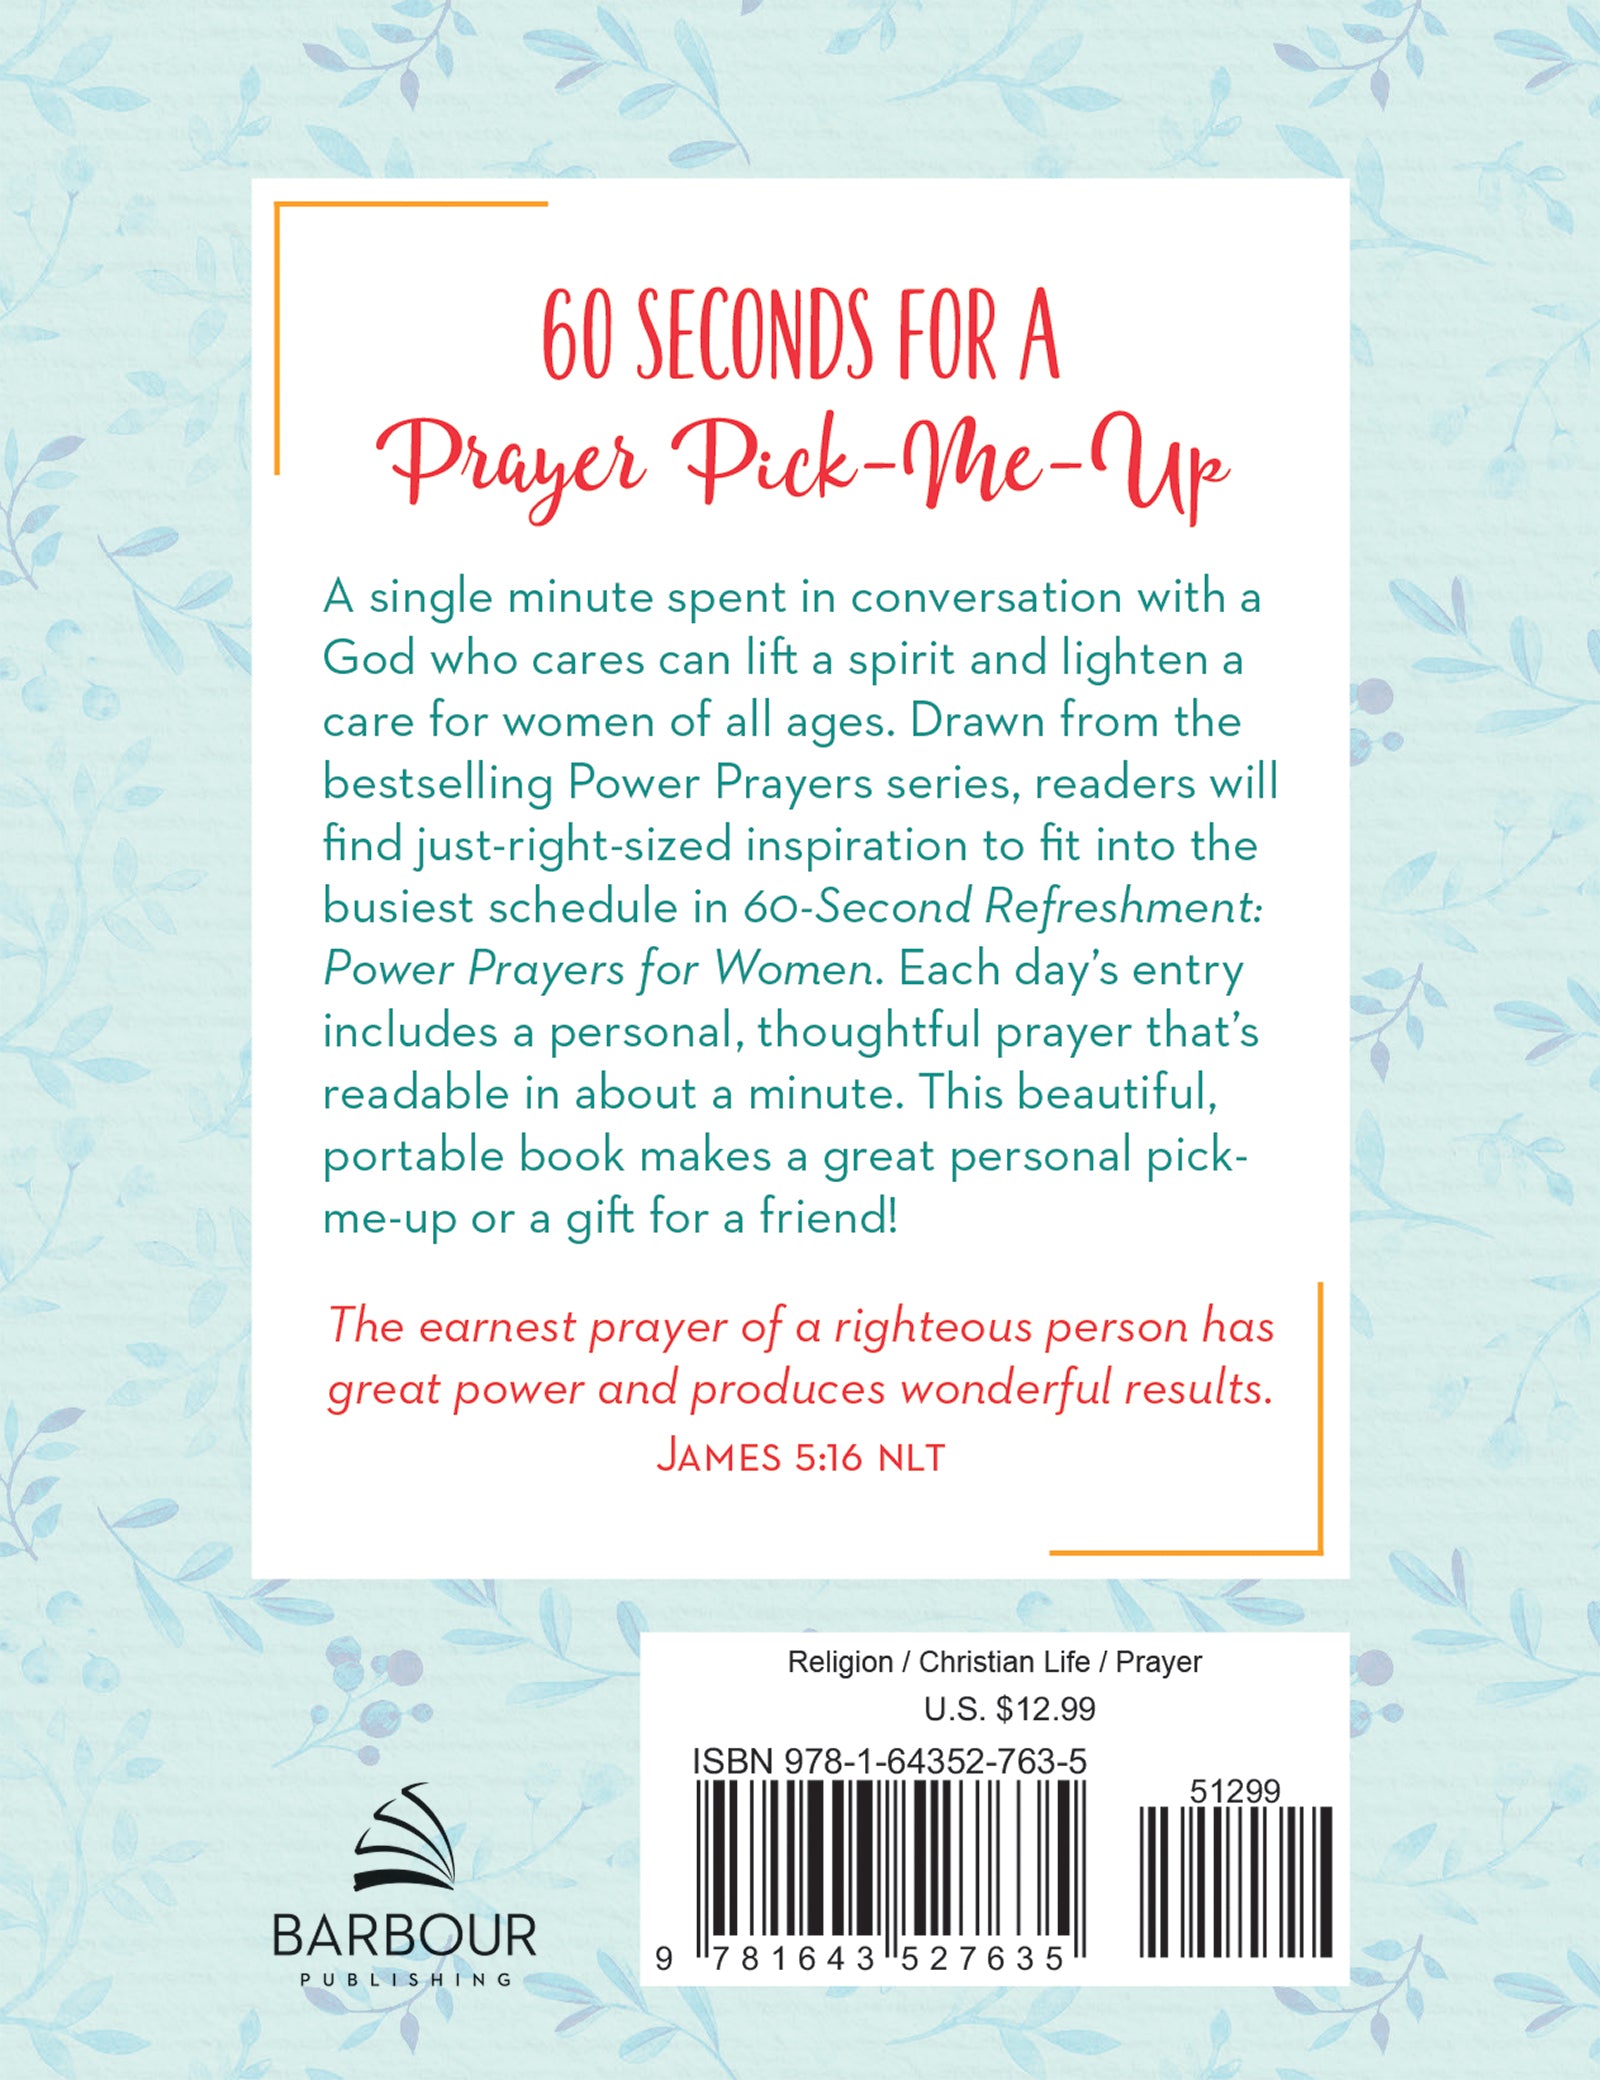 60-Second Refreshment: Power Prayers for Women - The Christian Gift Company